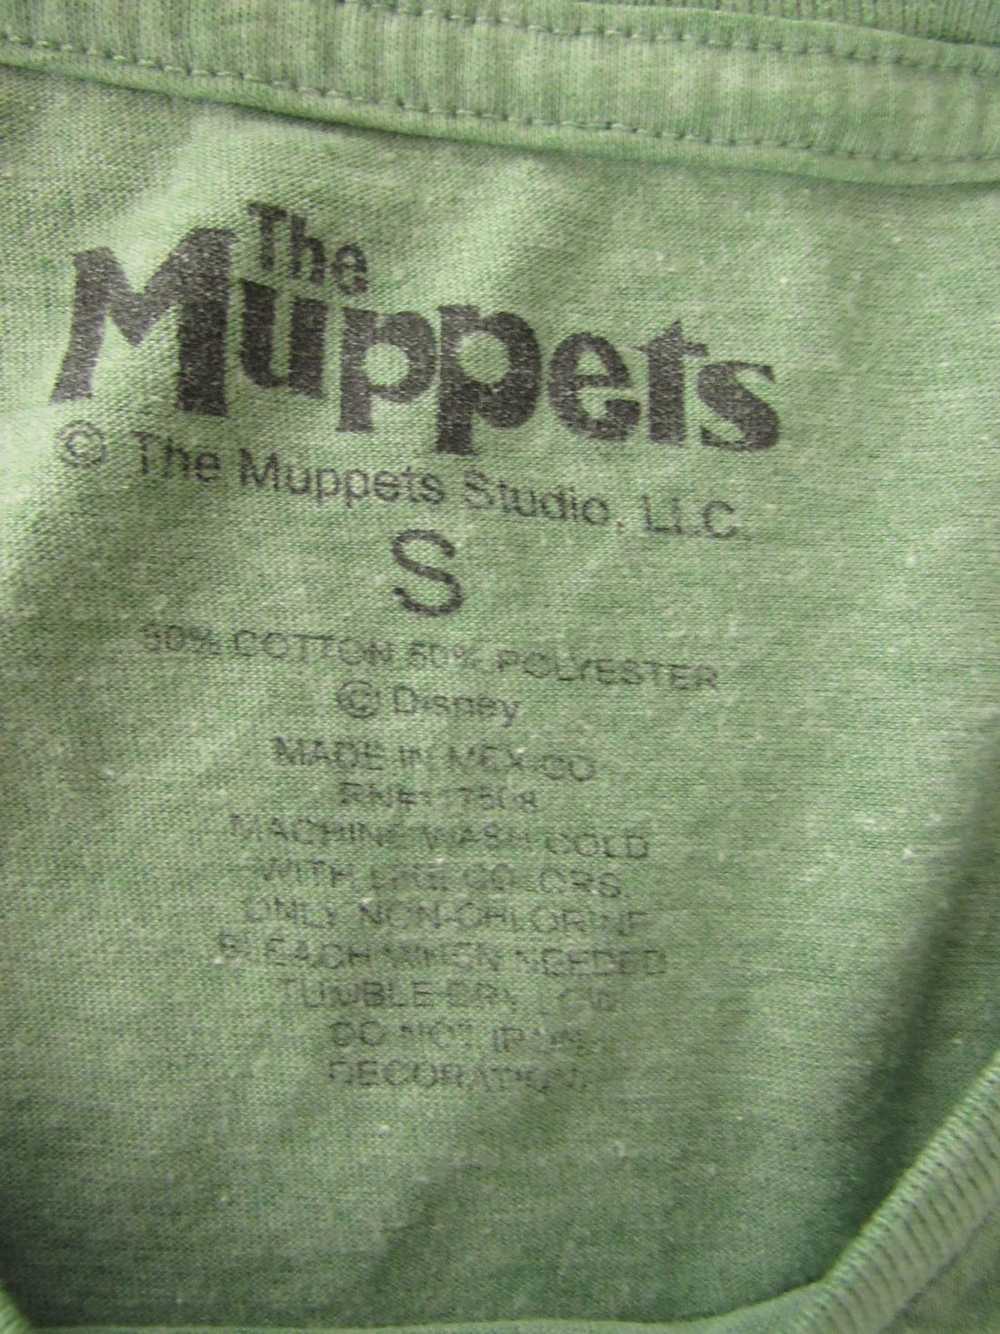 The Muppets Graphic Tee Shirt - image 3